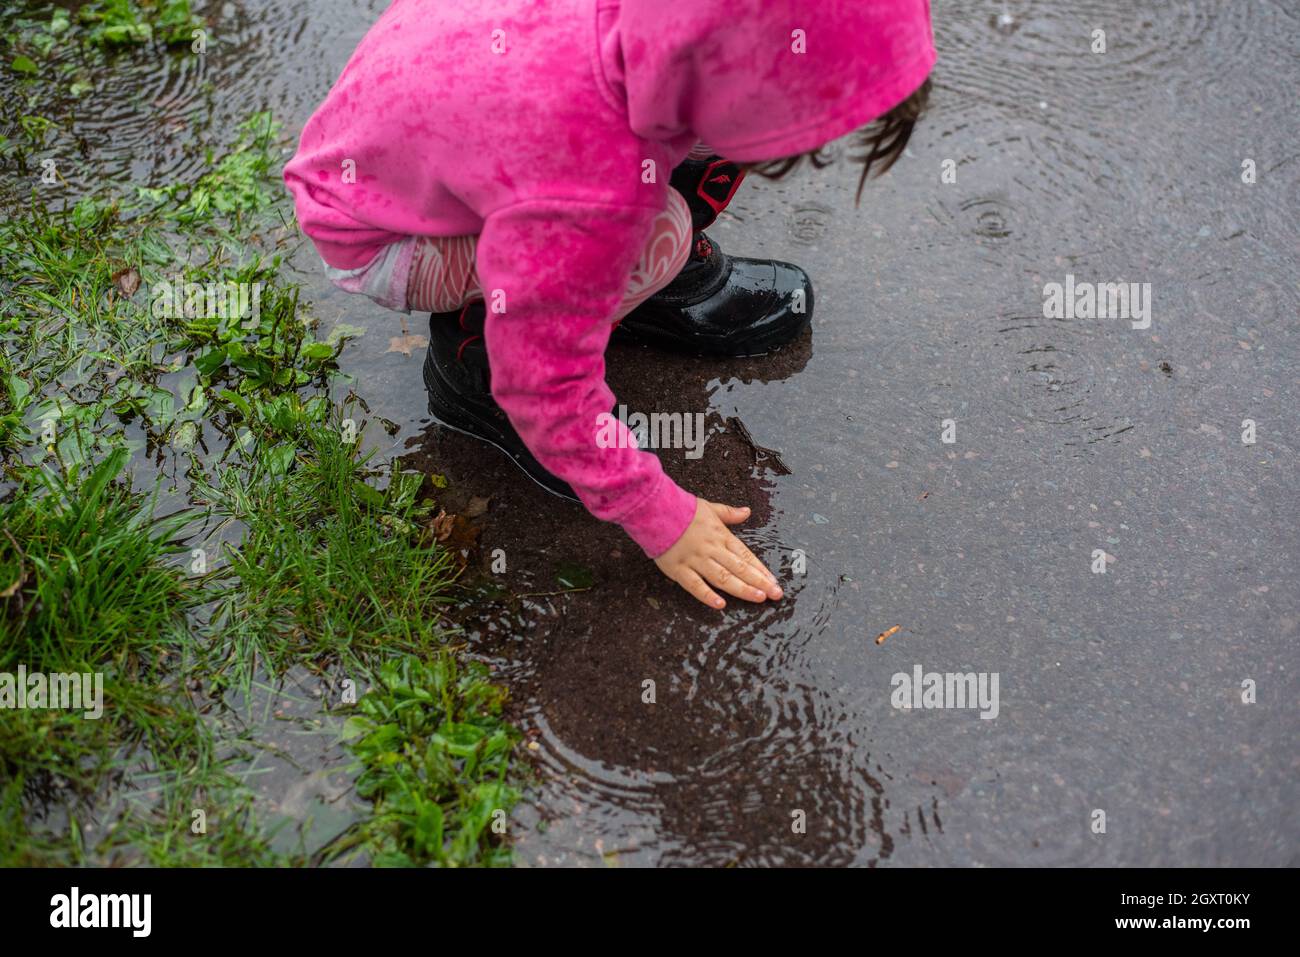 A young child plays on a sidewalk in the rain while wearing pink. Stock Photo